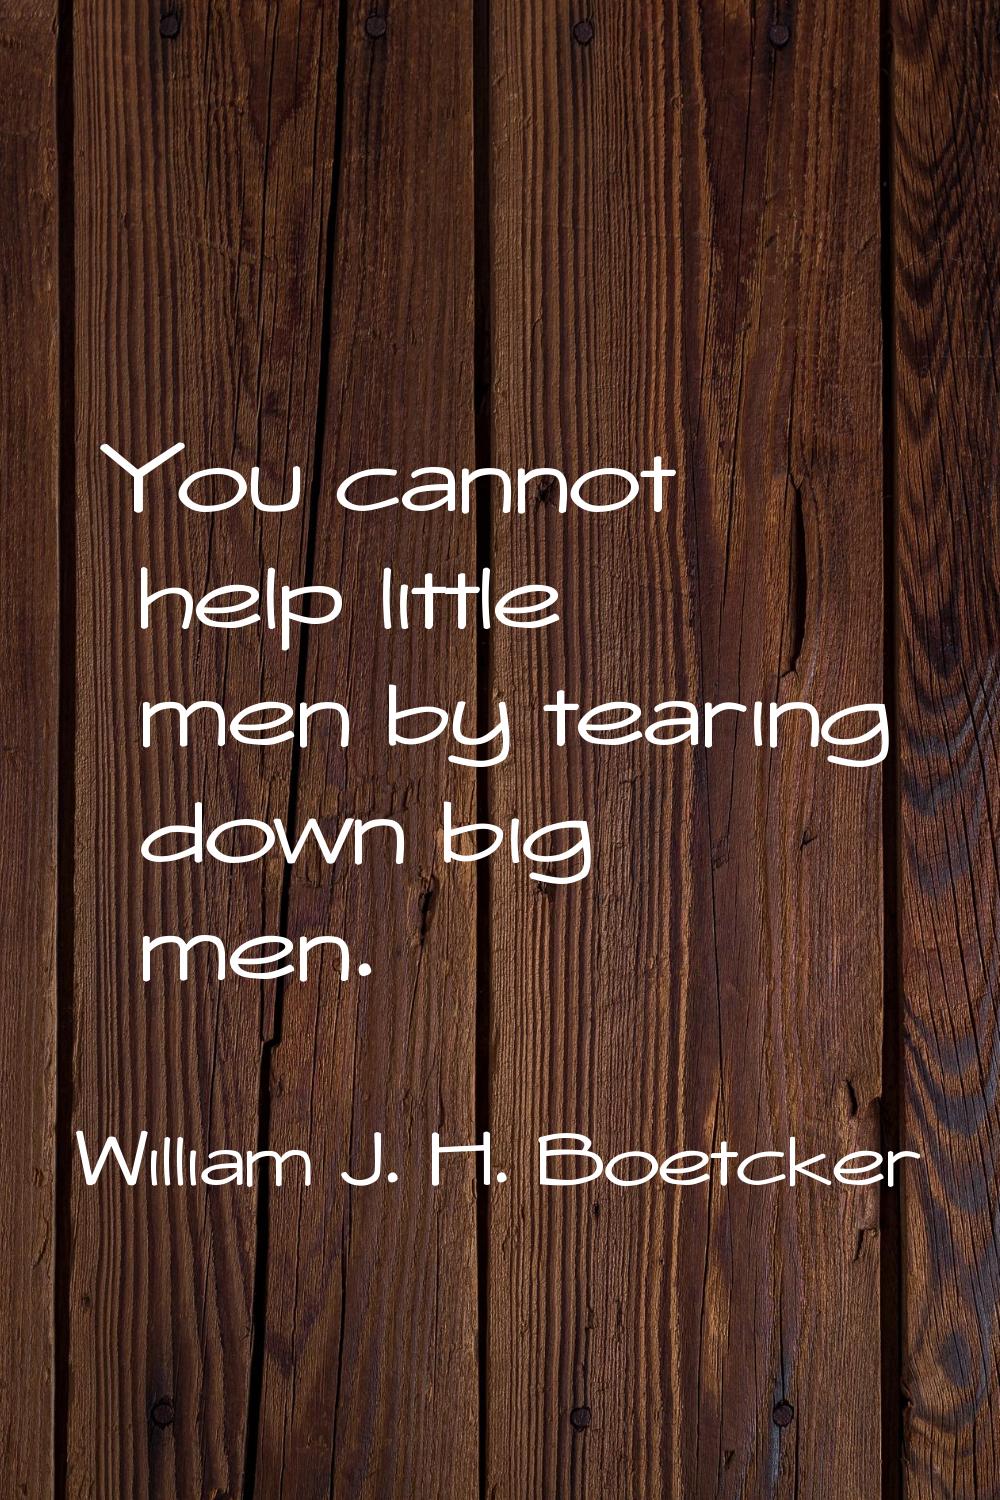 You cannot help little men by tearing down big men.